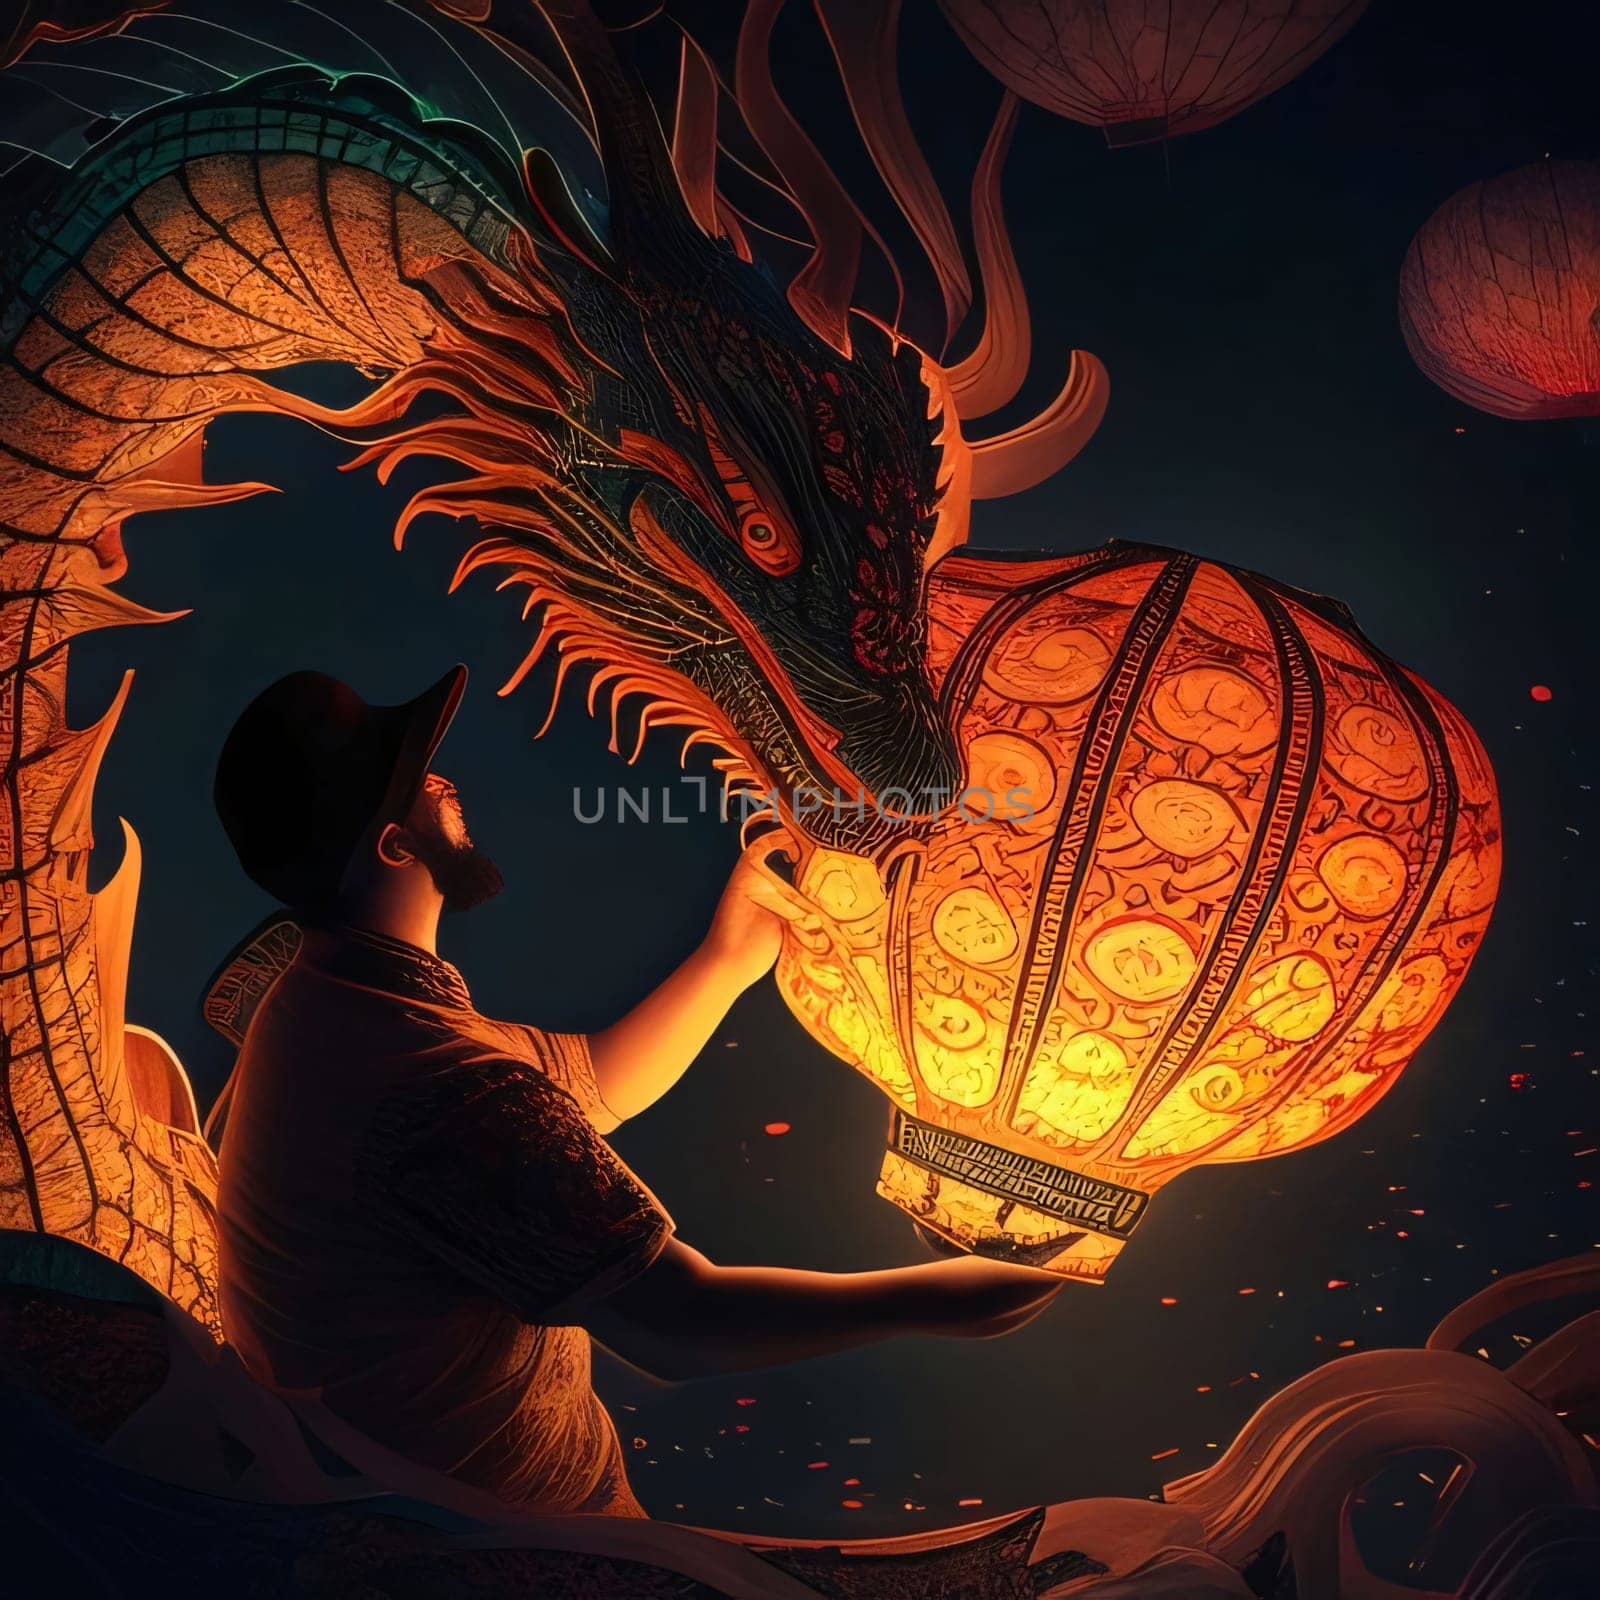 Illustration of a man with a large lantern on in his hand and the head of a dragon. Chinese New Year celebrations. A time of celebration and resolutions.